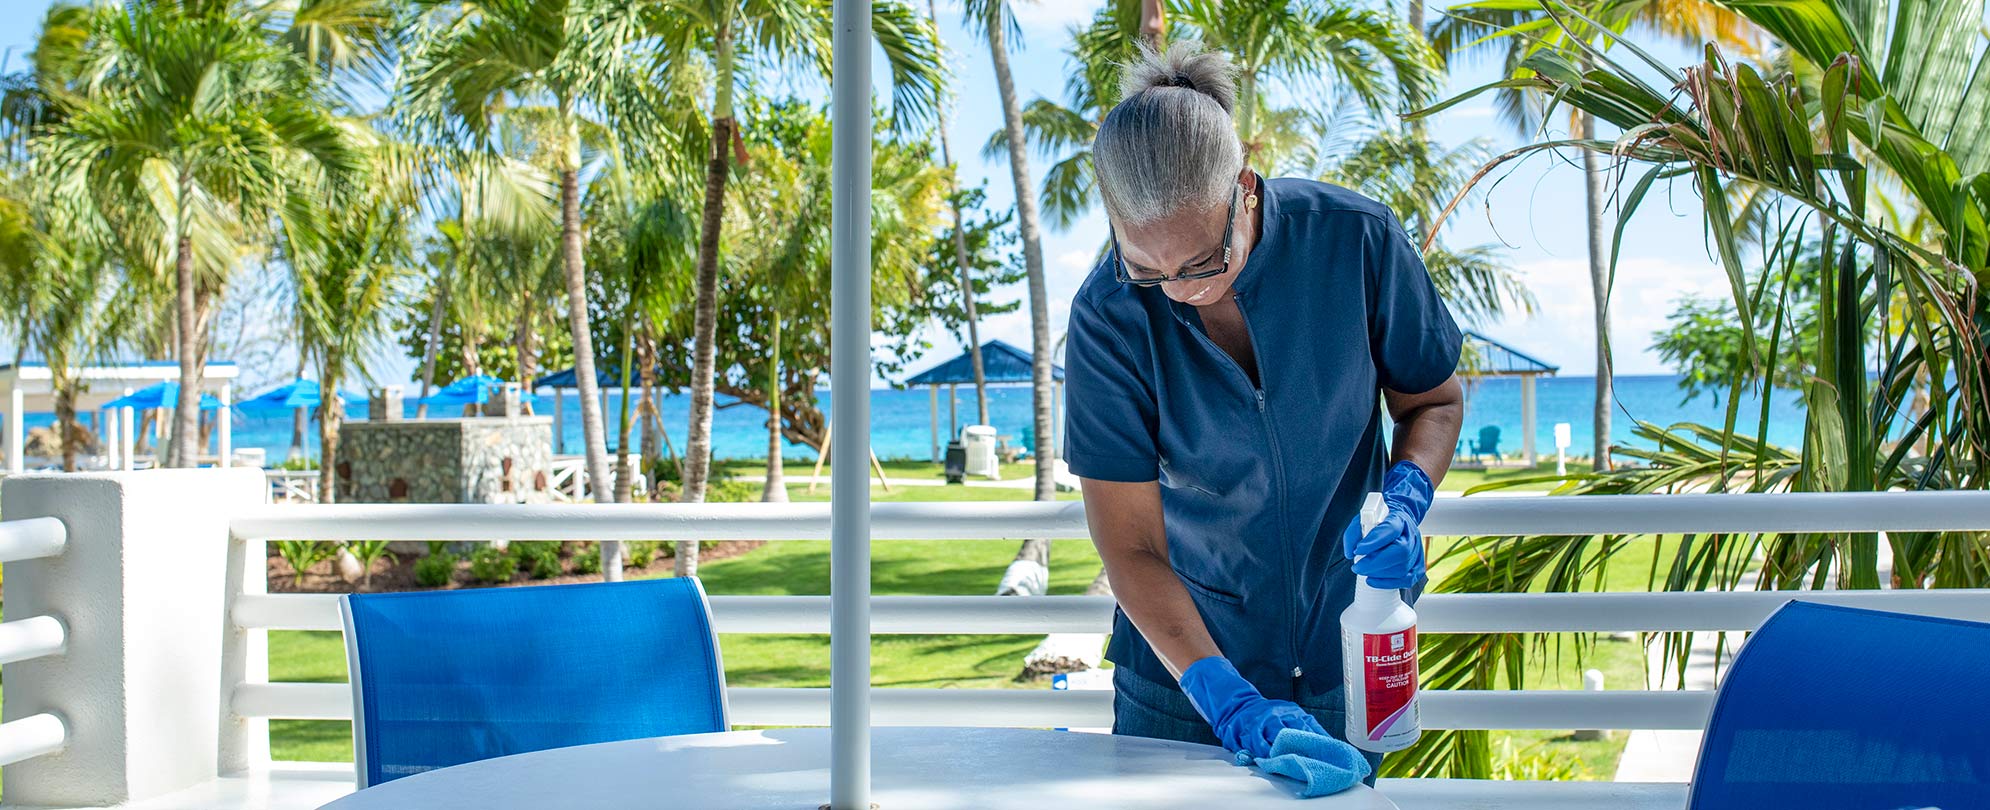 A housekeeper is cleaning the outdoor seating area at a Club Wyndham resort.